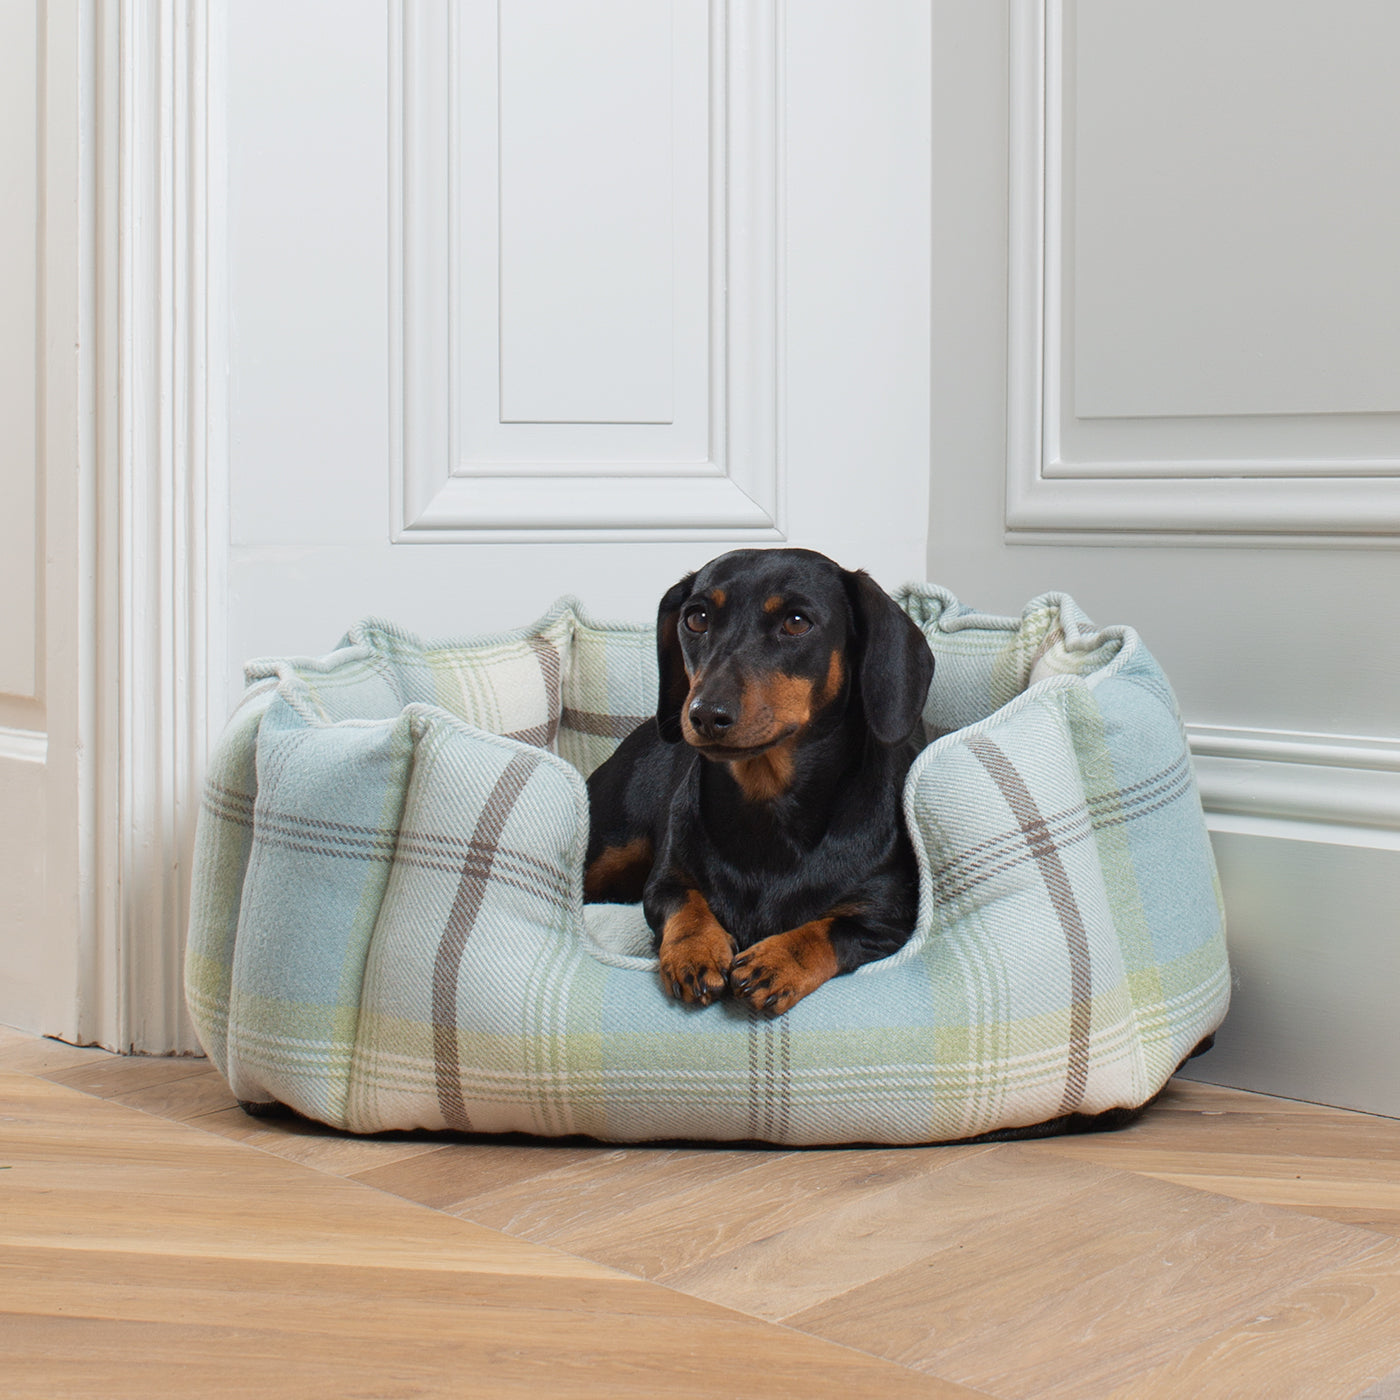 Discover Our Luxurious High Wall Bed For Dogs, Featuring inner pillow with plush teddy fleece on one side To Craft The Perfect Dogs Bed In Stunning Duck Egg Tweed! Available To Personalise Now at Lords & Labradors    